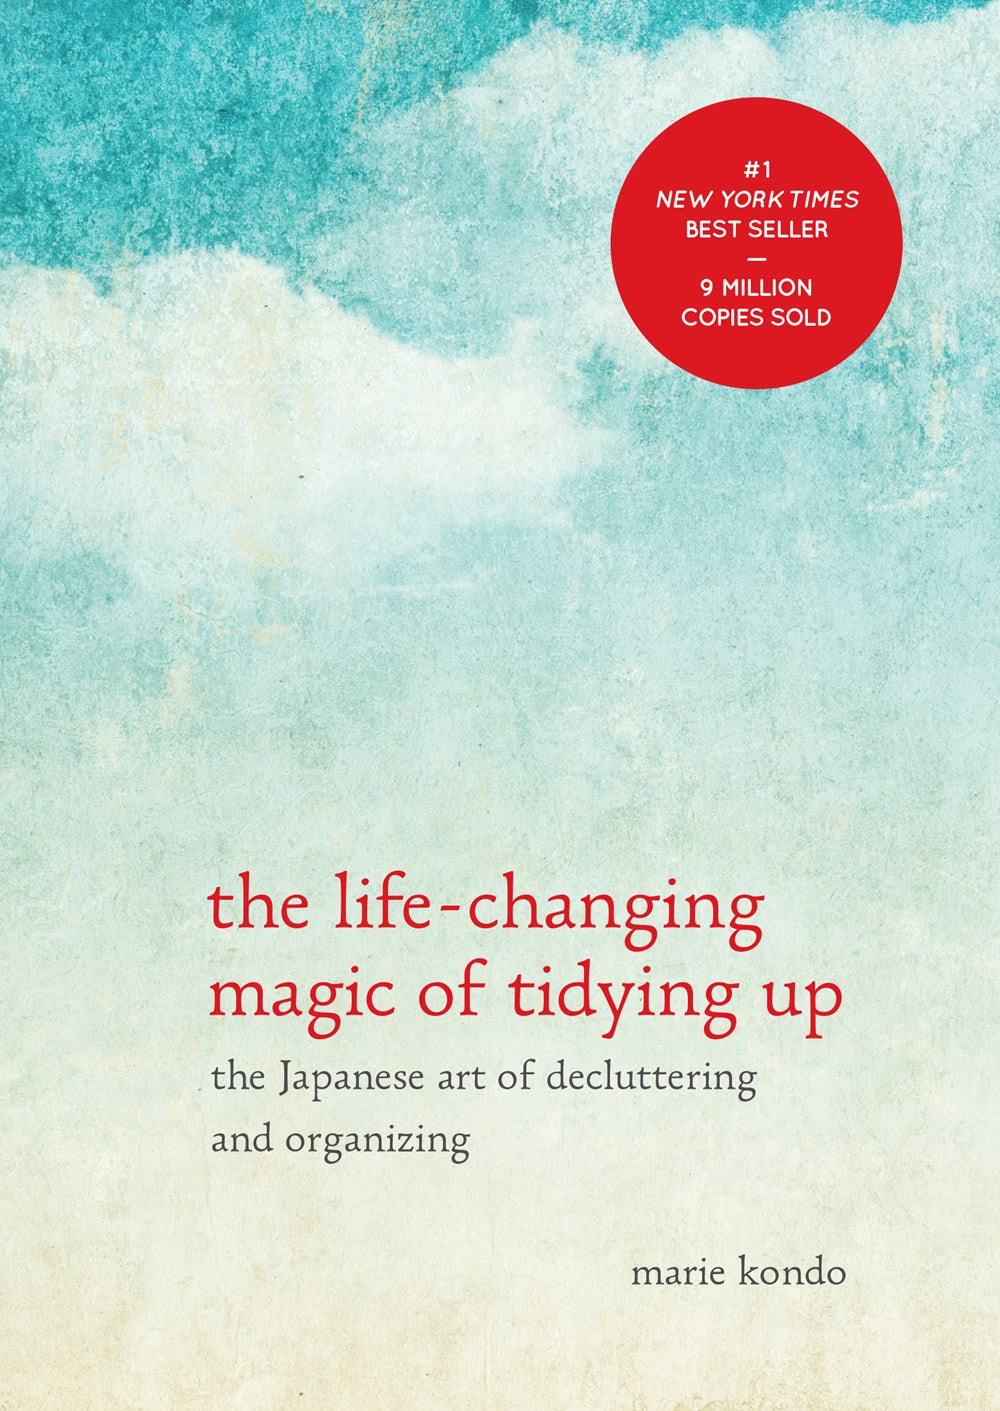 The Life-Changing Magic of Tidying Up: The Japanese Art of Decluttering and Organizing (Life Changing Magic of Tidying Up)